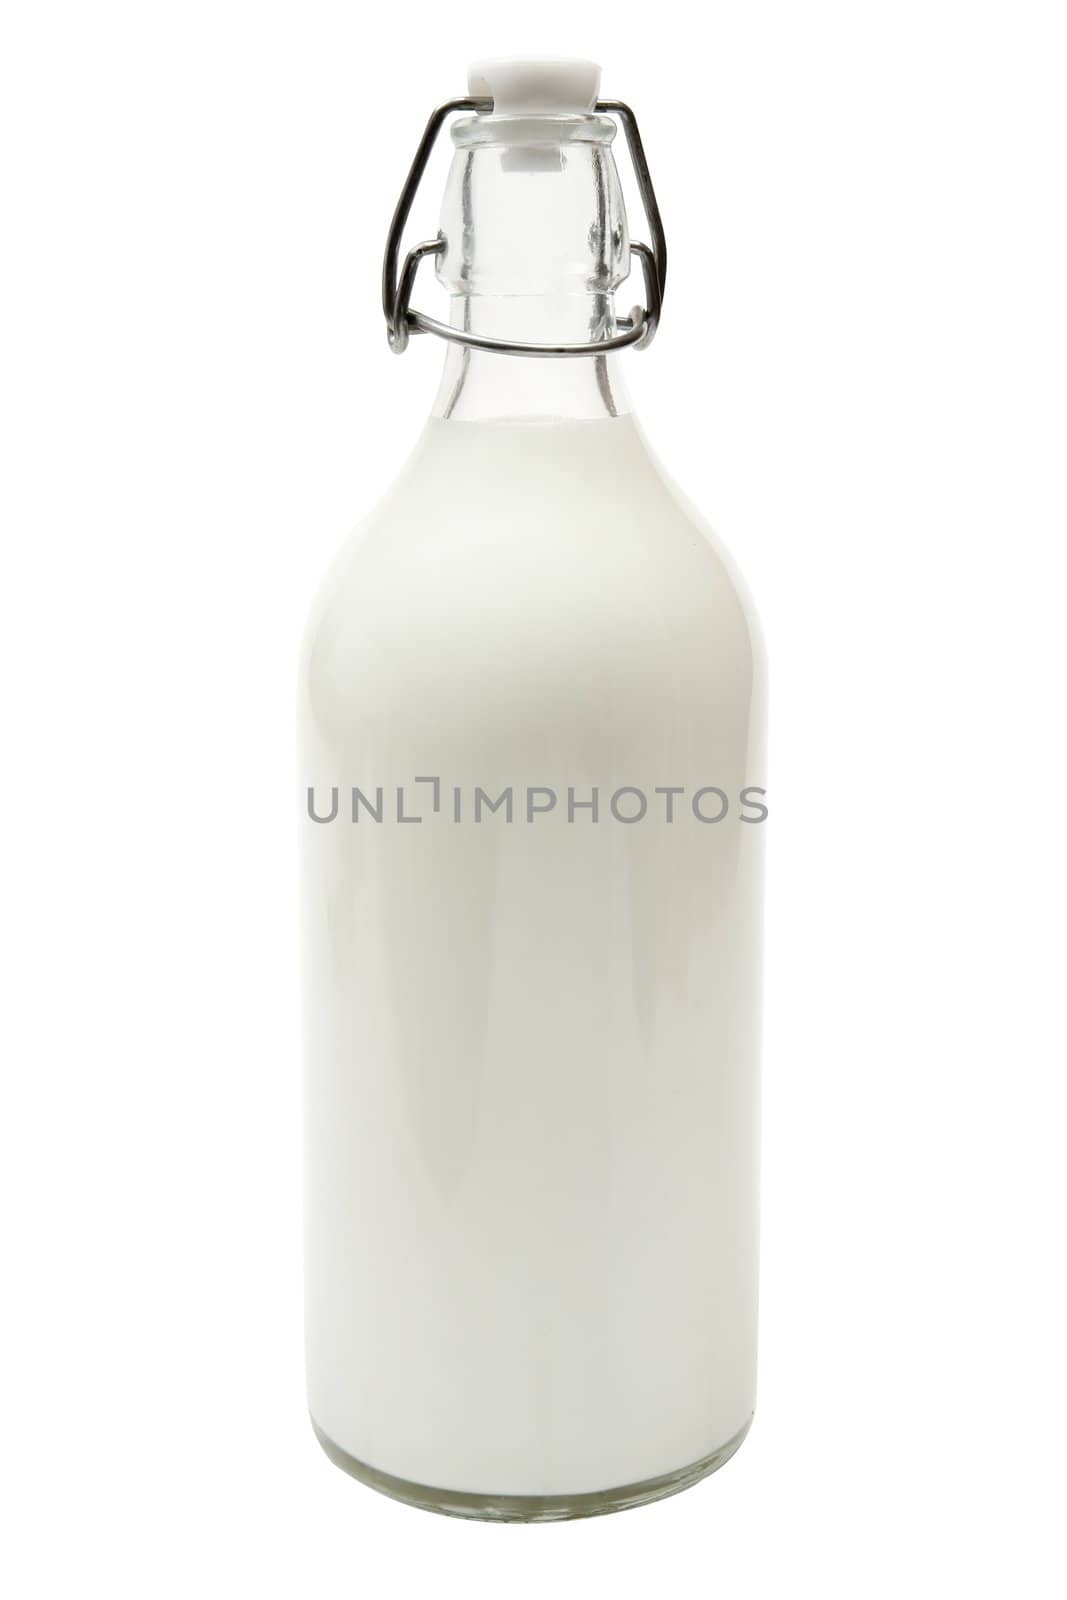 Fresh milk in a glass bottle. Isolated on a white background.